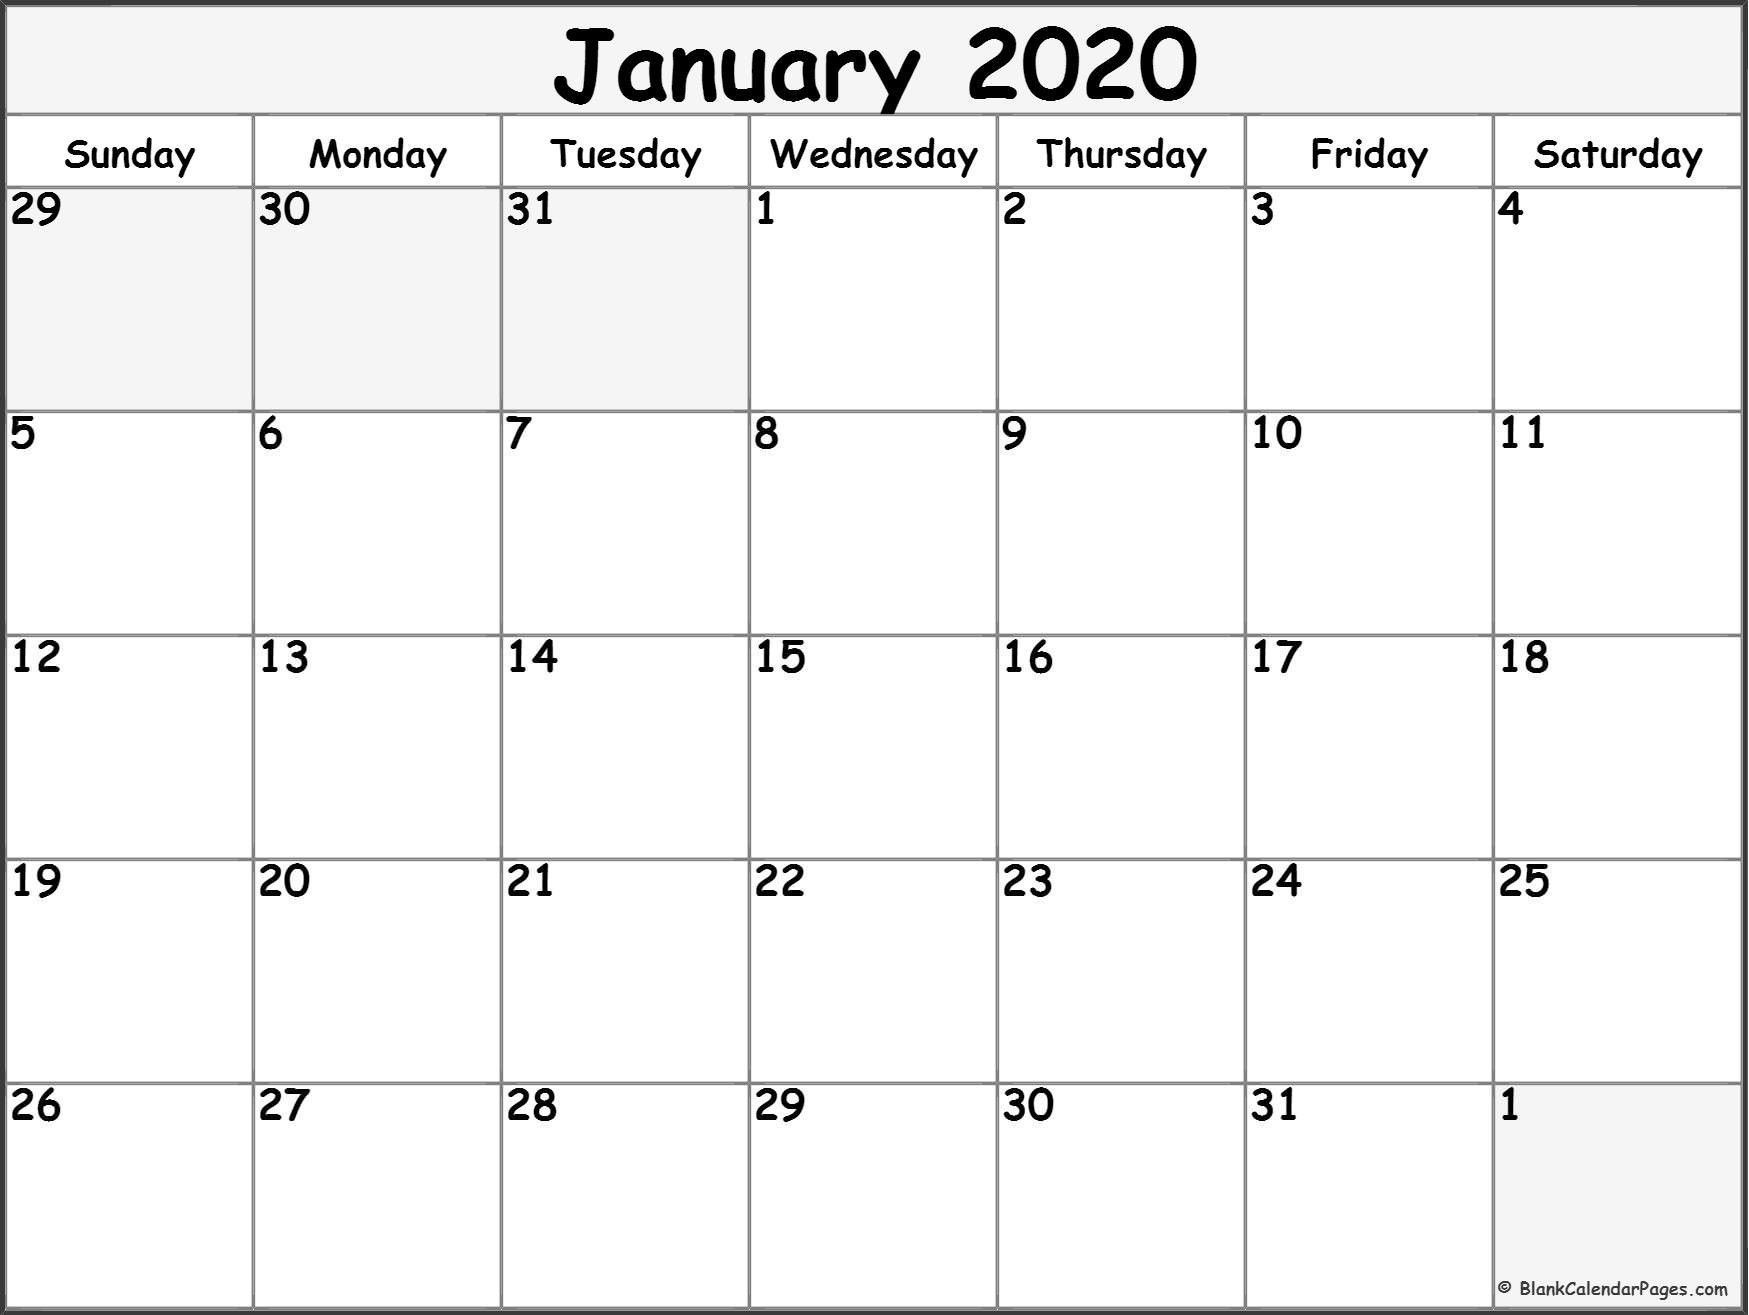 new images 2020 calendar january tips its correct that will